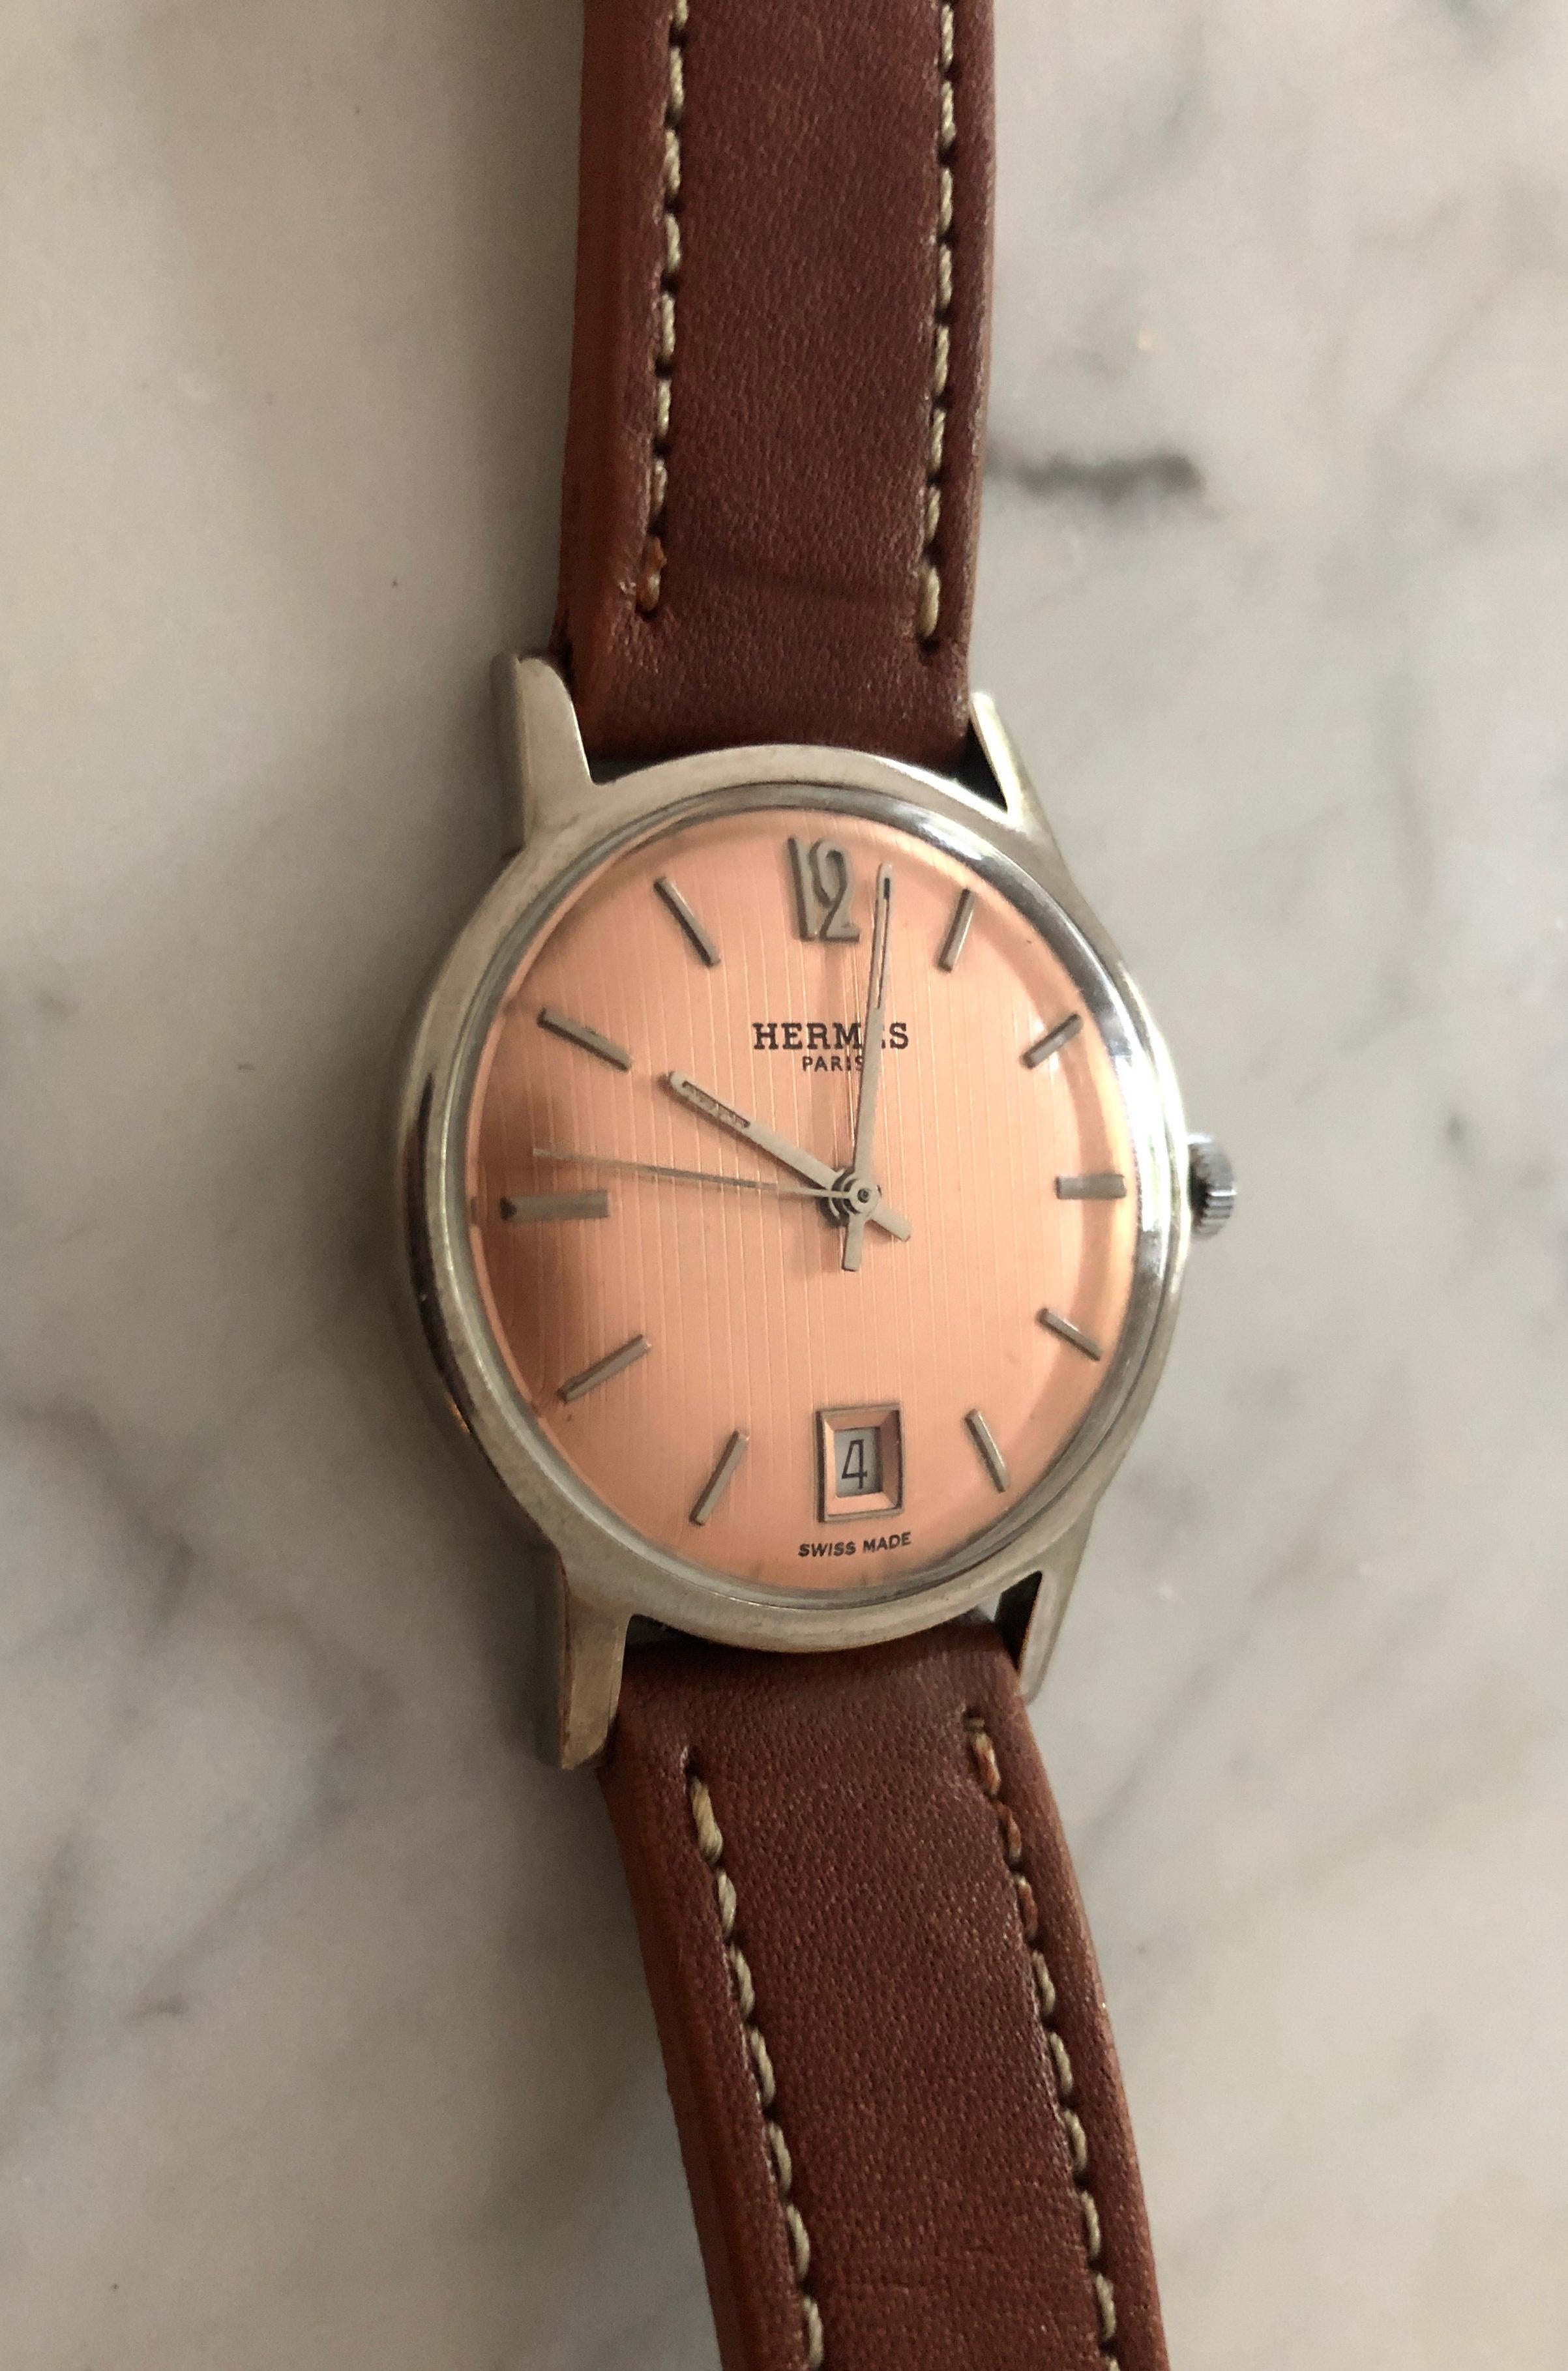 Vintage, one-of-a-kind, beautiful Champagne Rosé dial mechanical Hermès watch. Works great  when wound.

Brand: Hermes Paris
Age: circa 1954
Gender: Men's.
Dial: Champagne Rosé -Guilloche. Chromed markers and chromed hands. Central Seconds Hand.